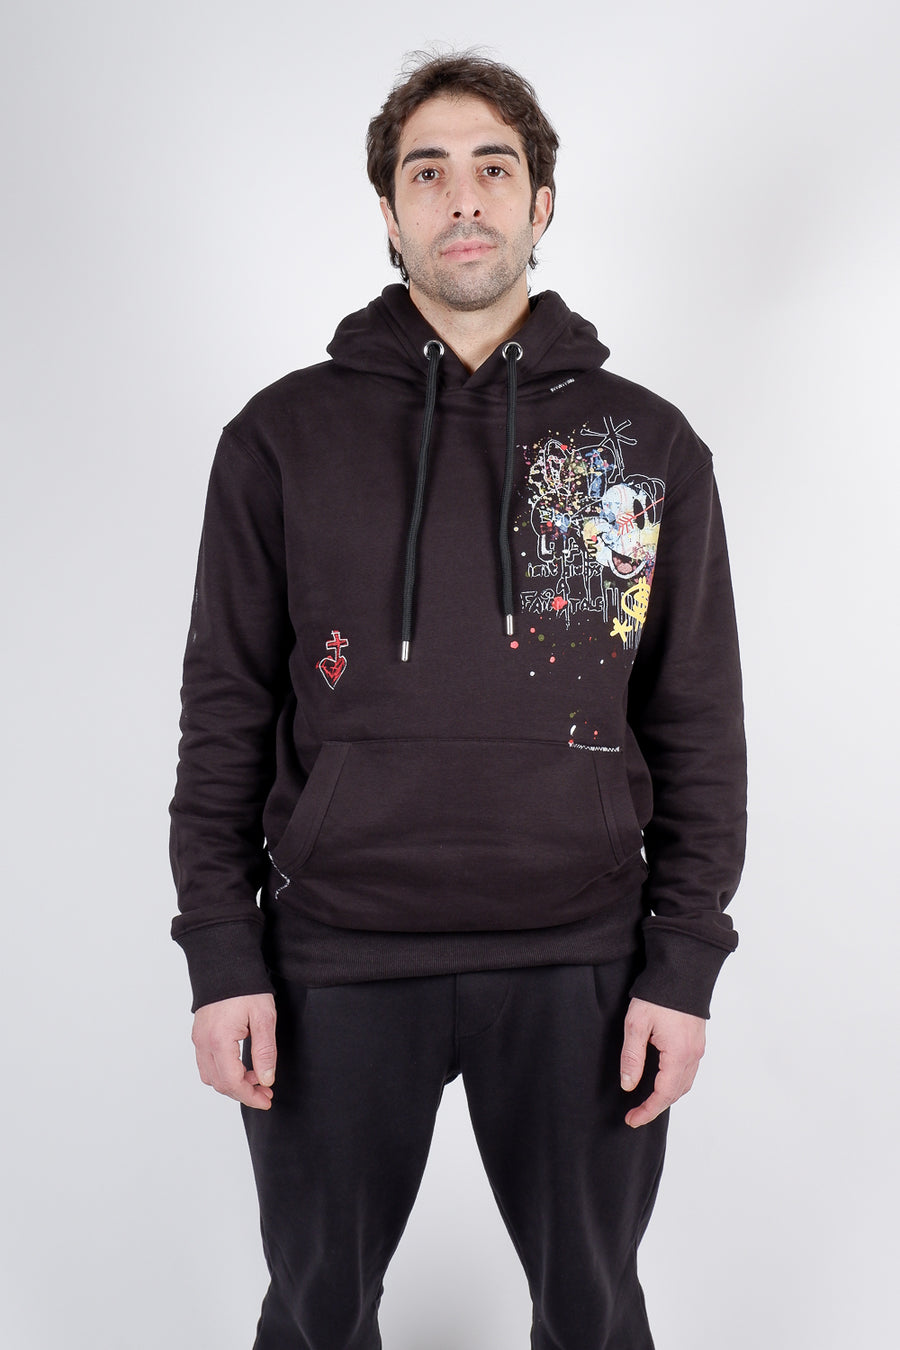 Buy the ABE Mickey Hoodie in Black at Intro. Spend £50 for free UK delivery. Official stockists. We ship worldwide.